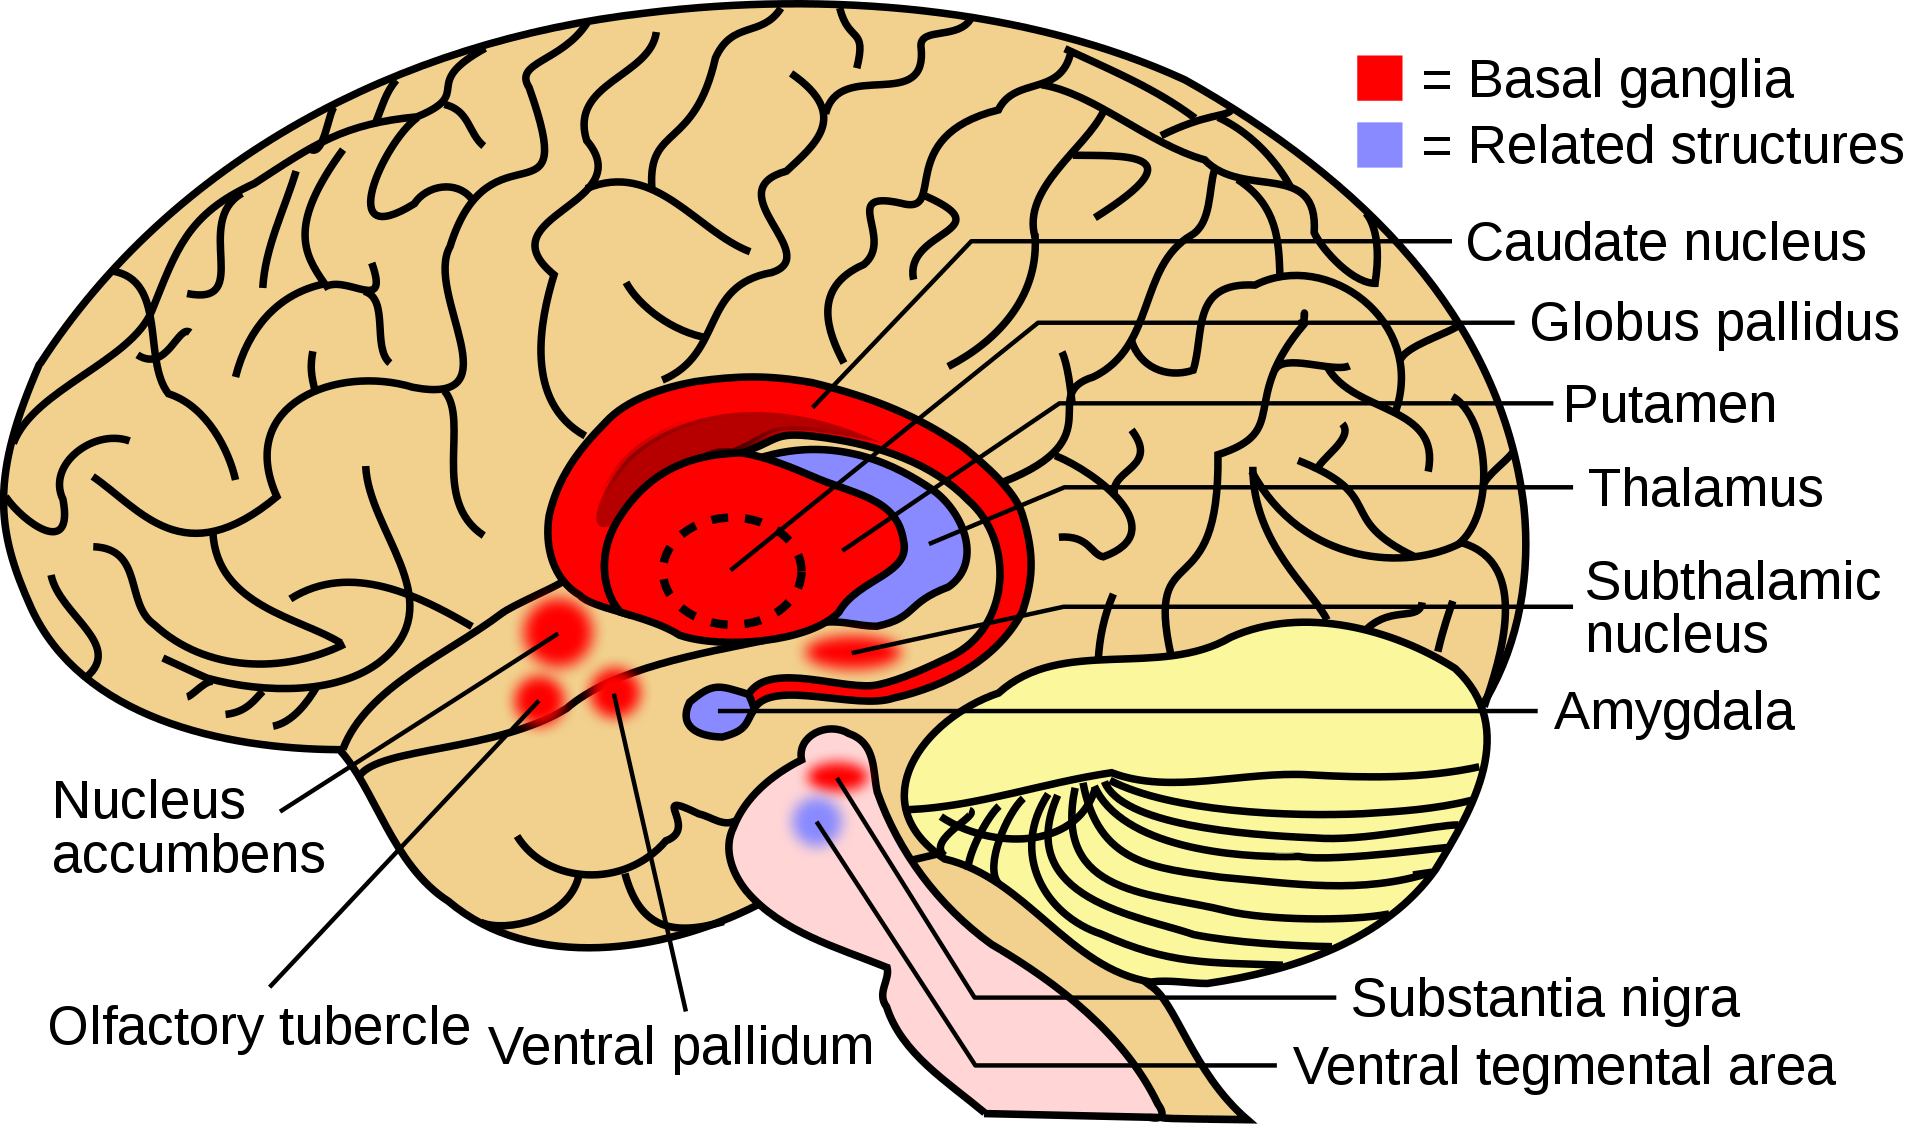 Basal Ganglia and associated structures